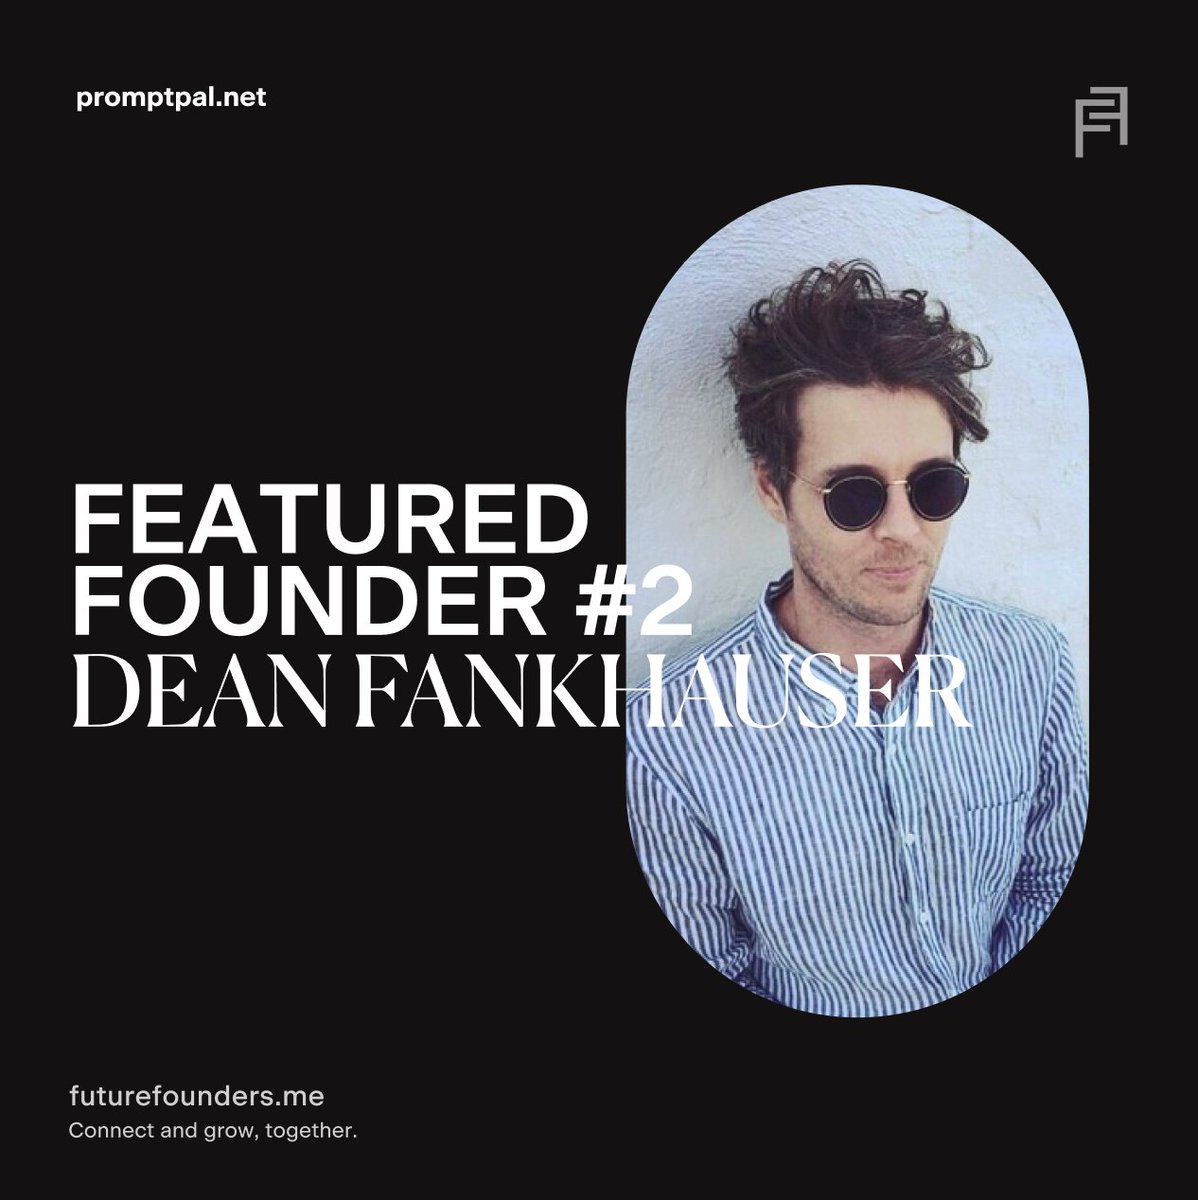 Dear Founders,

We're thrilled to introduce you to Dean Fankhauser, the founder of PromptPal, a platform to share and discover the best AI prompts. 

Stay tuned for this full interview on our FutureFounders Blog soon!